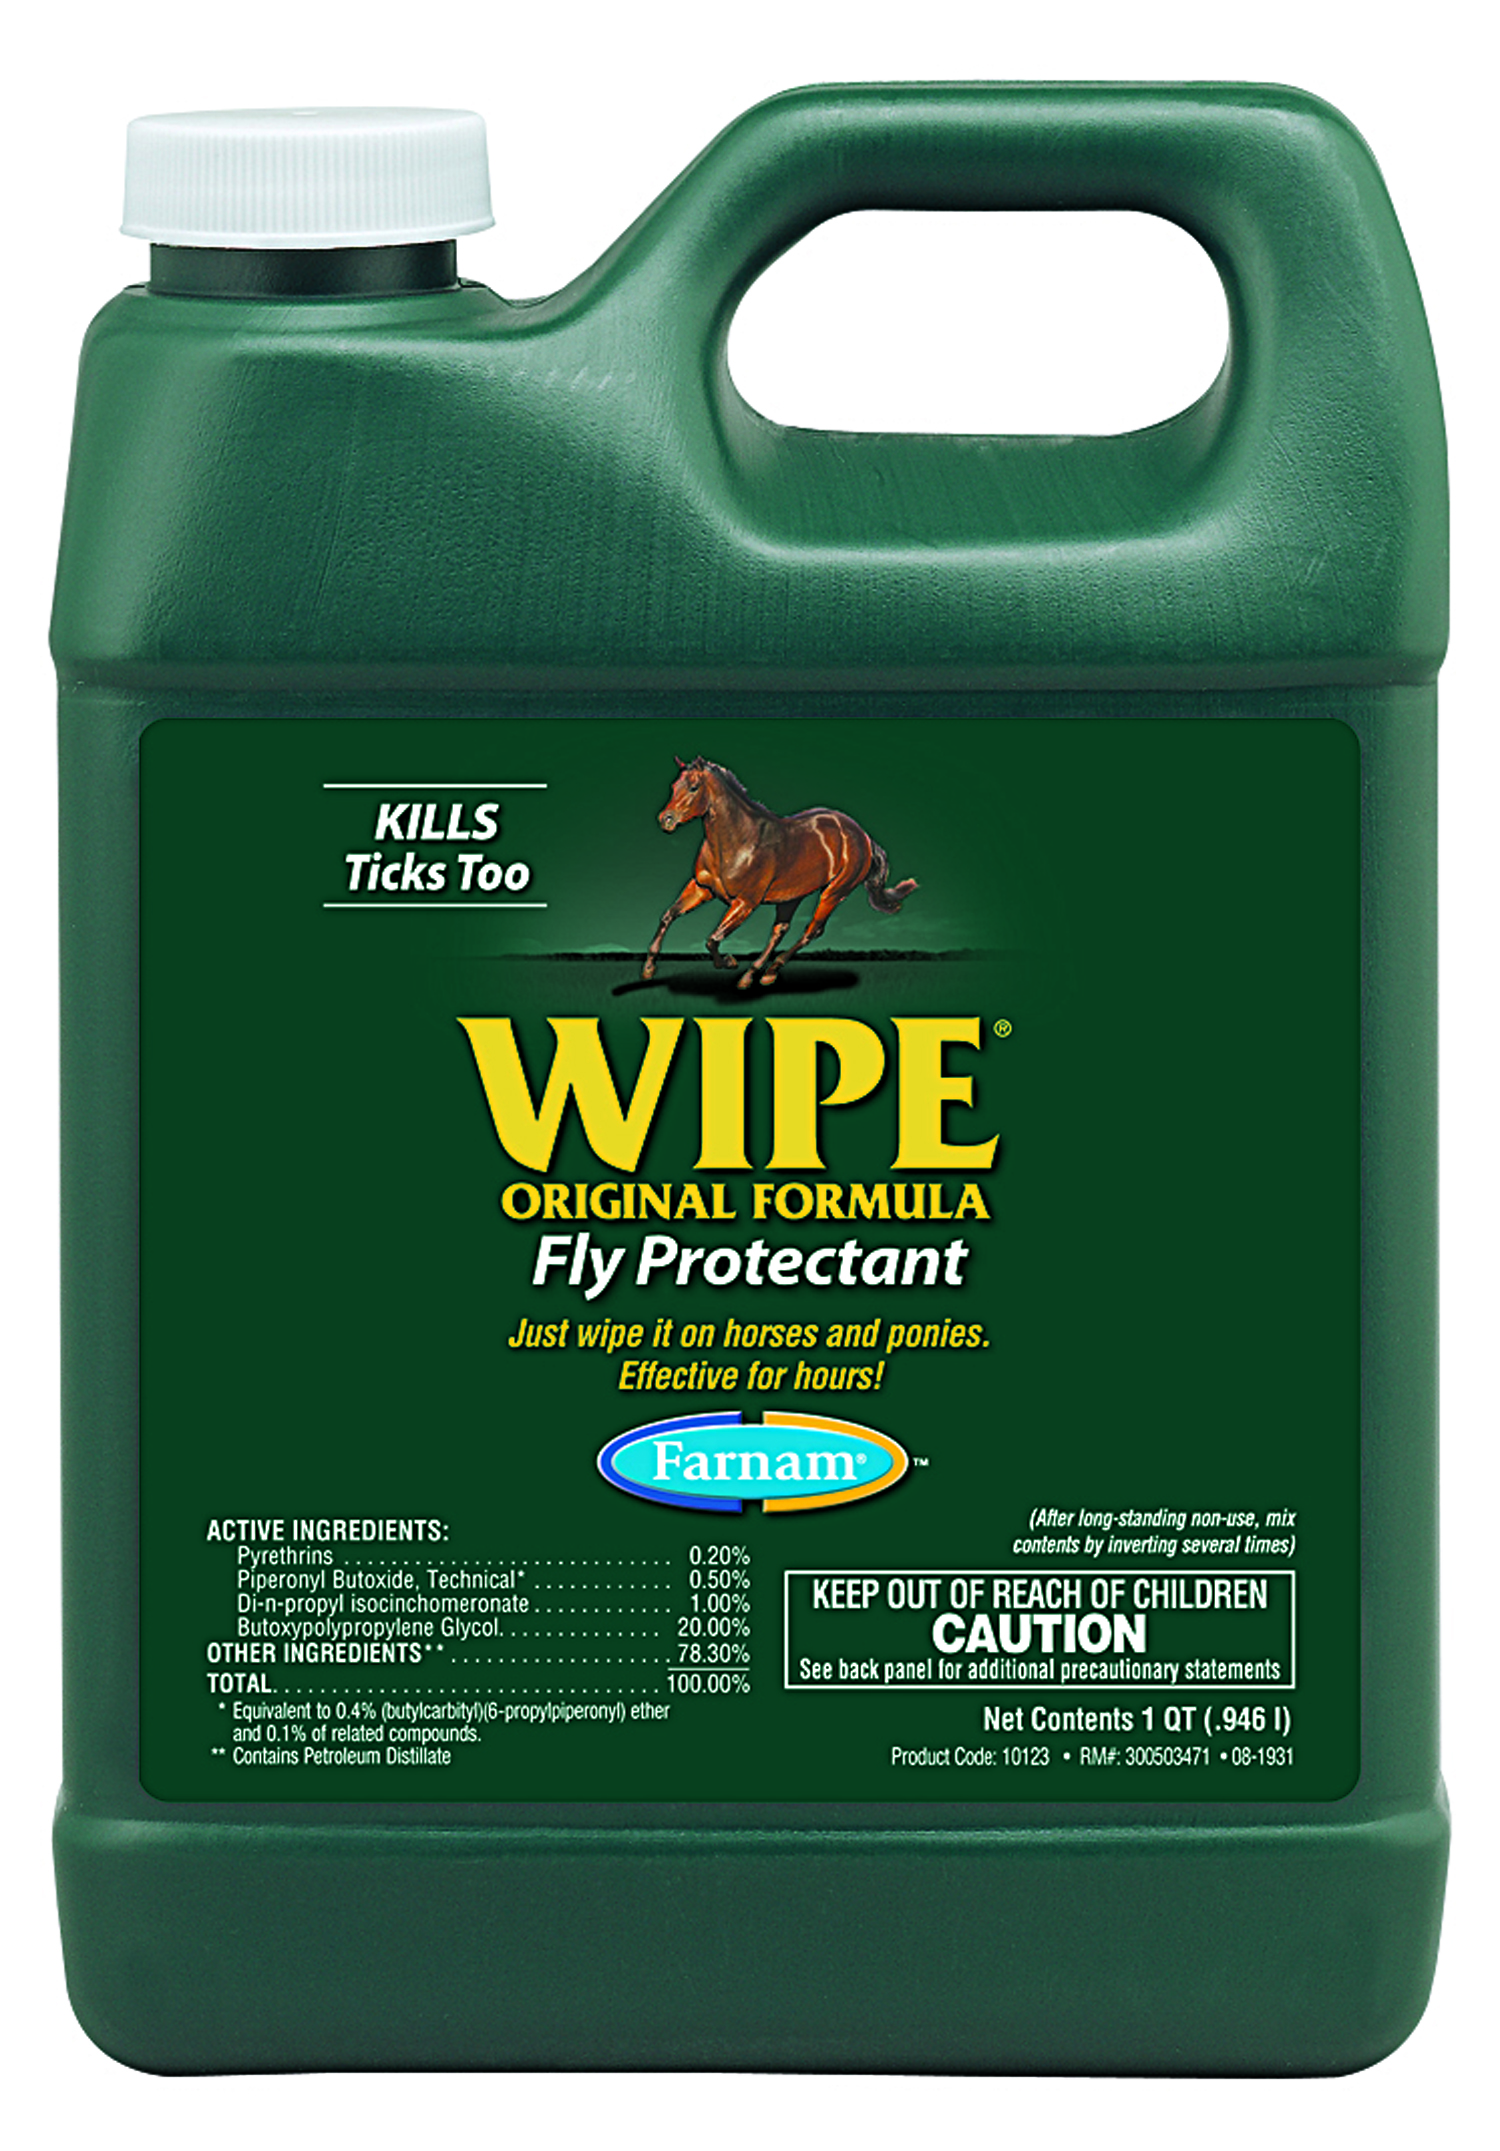 WIPE FLY PROTECTANT ORIGINAL